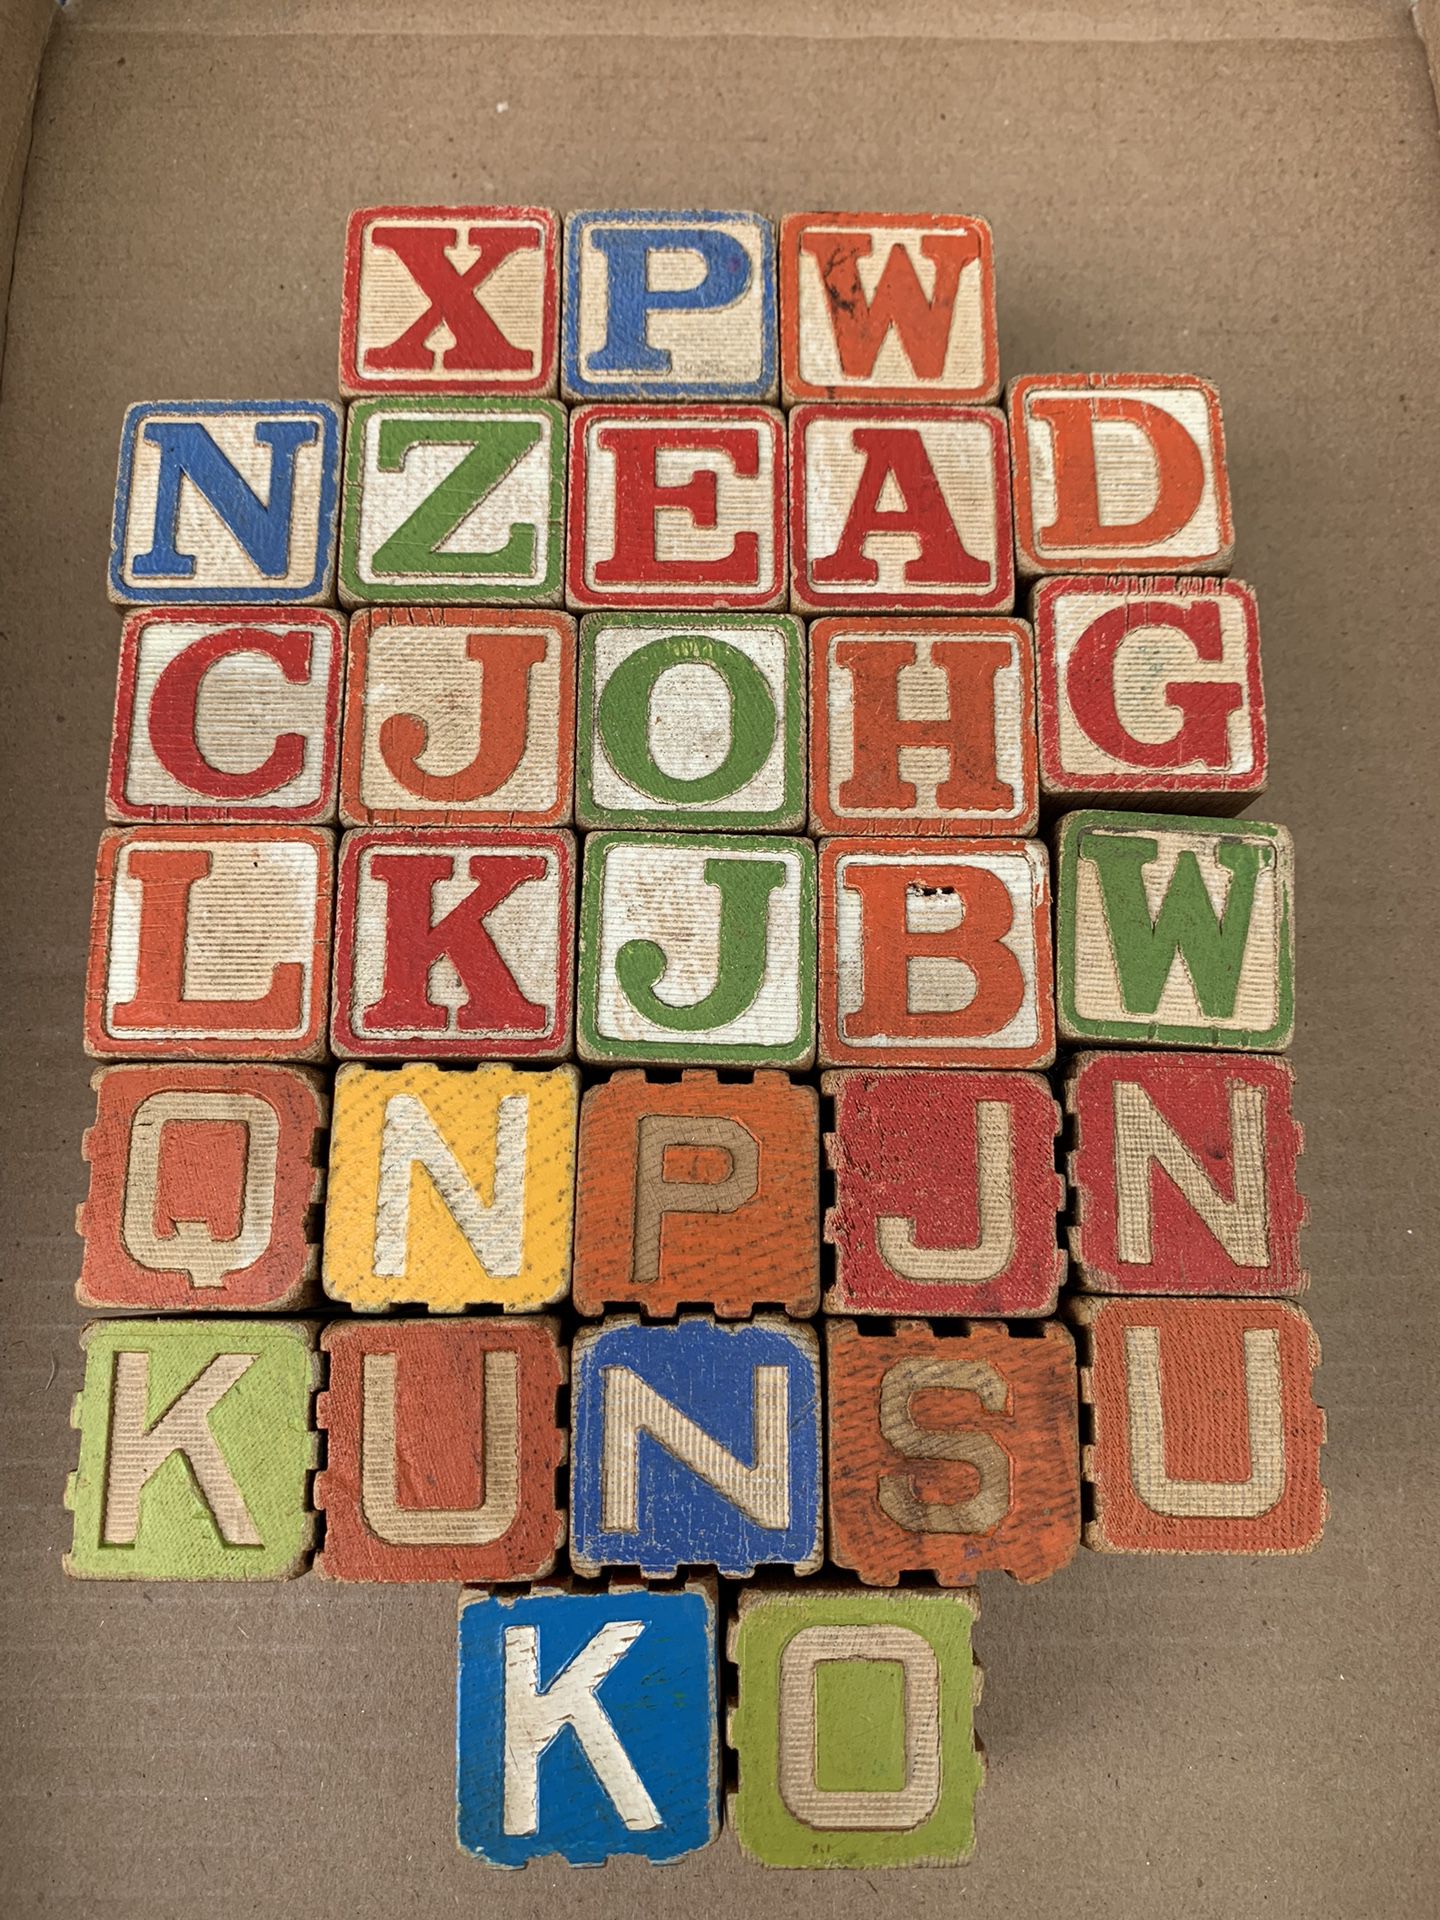  30 Vintage Wood Blocks Letters, Numbers, Stencils, Decorative Cubes. Appears to be two different brands. 1 3/8” x 1 3/8” in size. Weighs 1 pound. Use